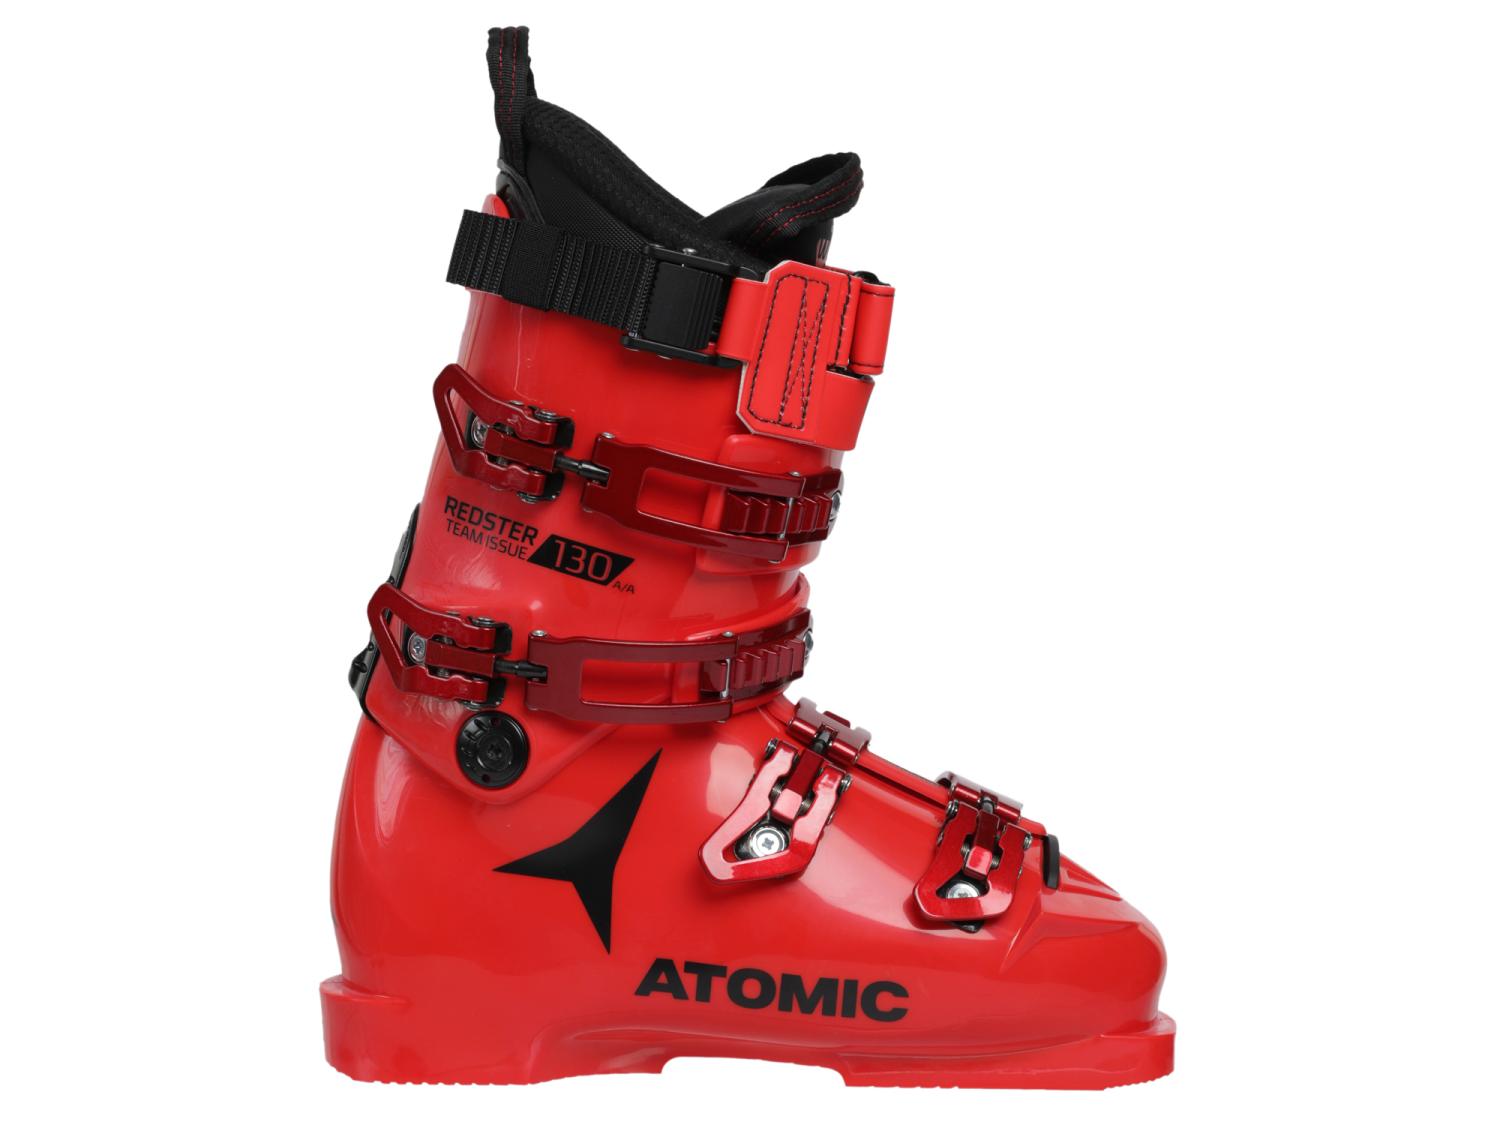   Atomic 20-21 Redster Team Issue 130 Red/Black